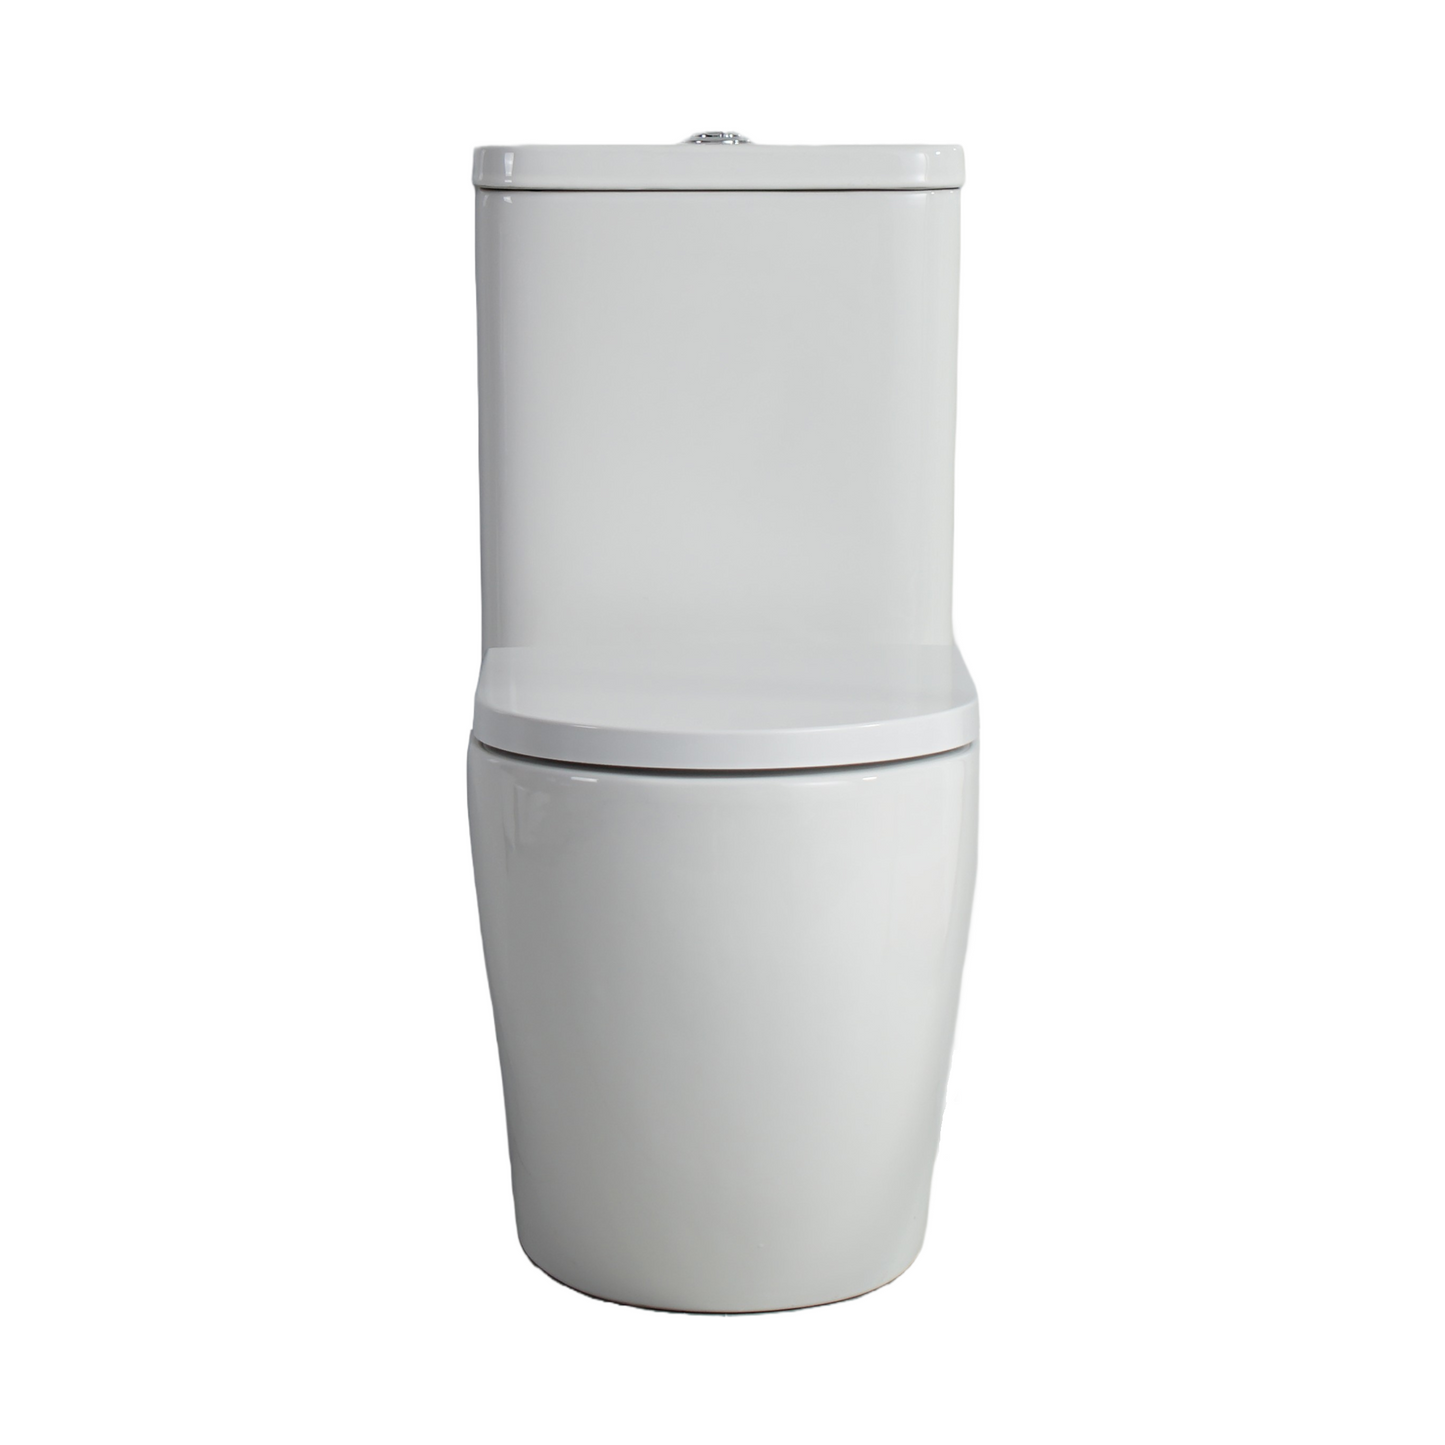 Back to Wall Rimless Toilet Suite with Streamilne Flush (Gloss White)